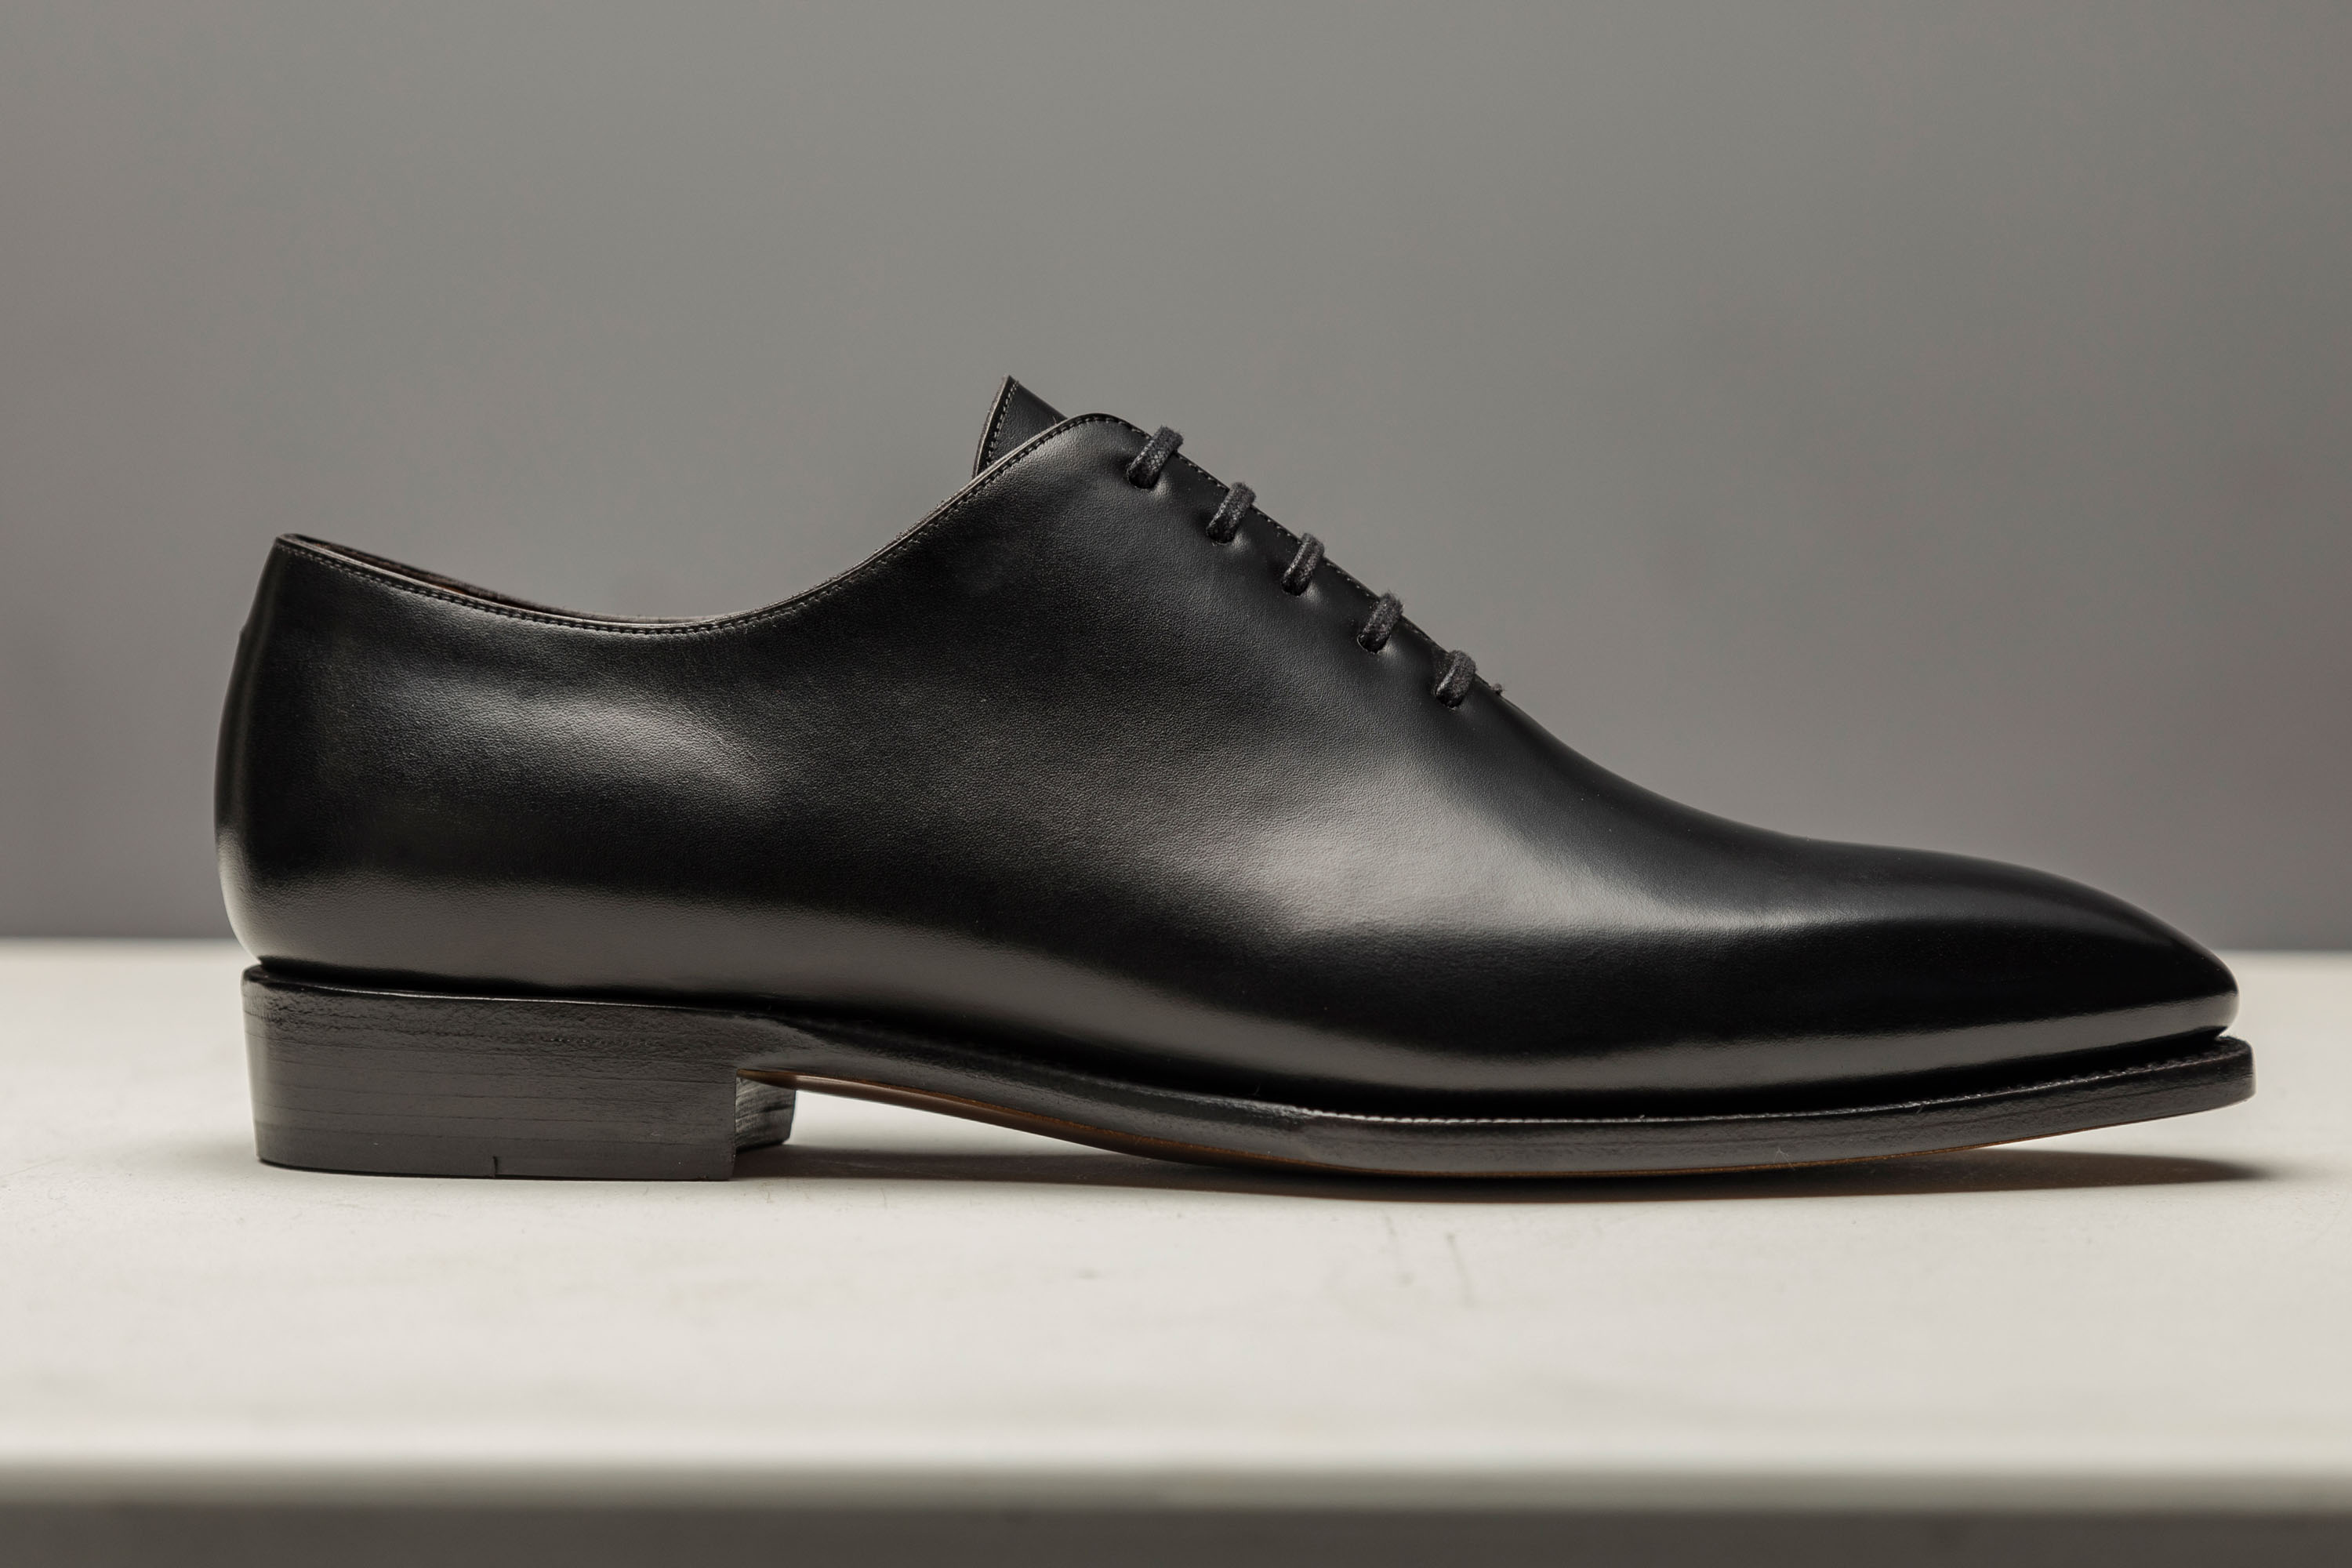 Black oxfords for graduation or the wedding party